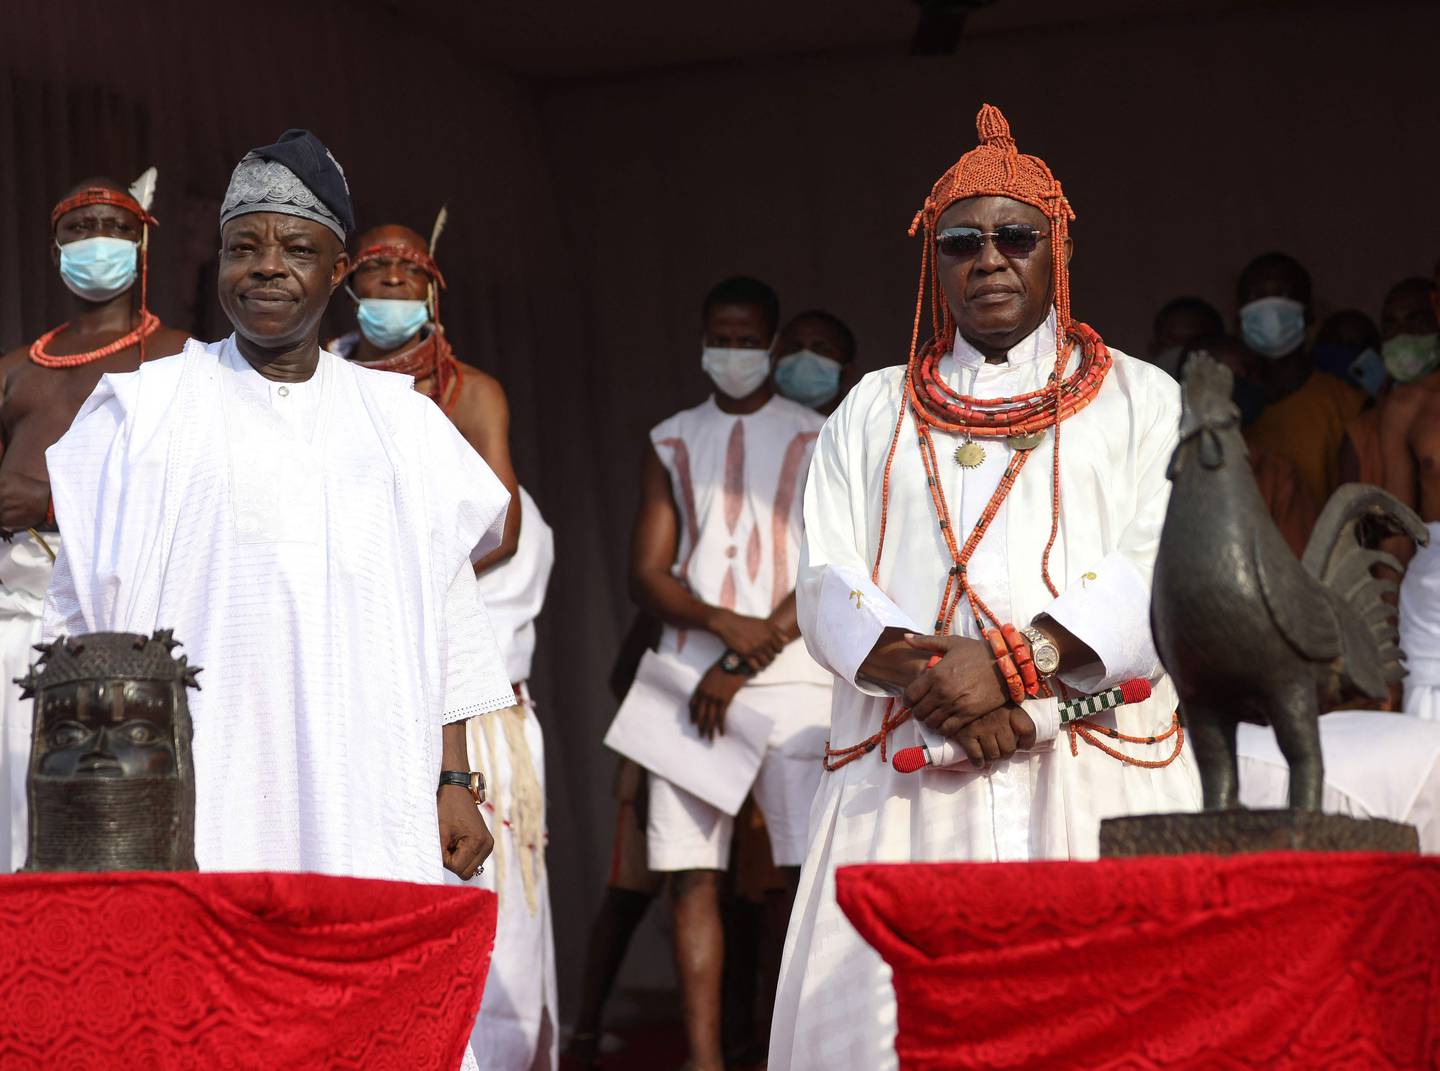 King Ewuare II, known as the Oba of Benin, right, and Nigerian High Commissioner to the UK, Sarafadeen Tunji Isola, receive the repatriated artefacts. AFP